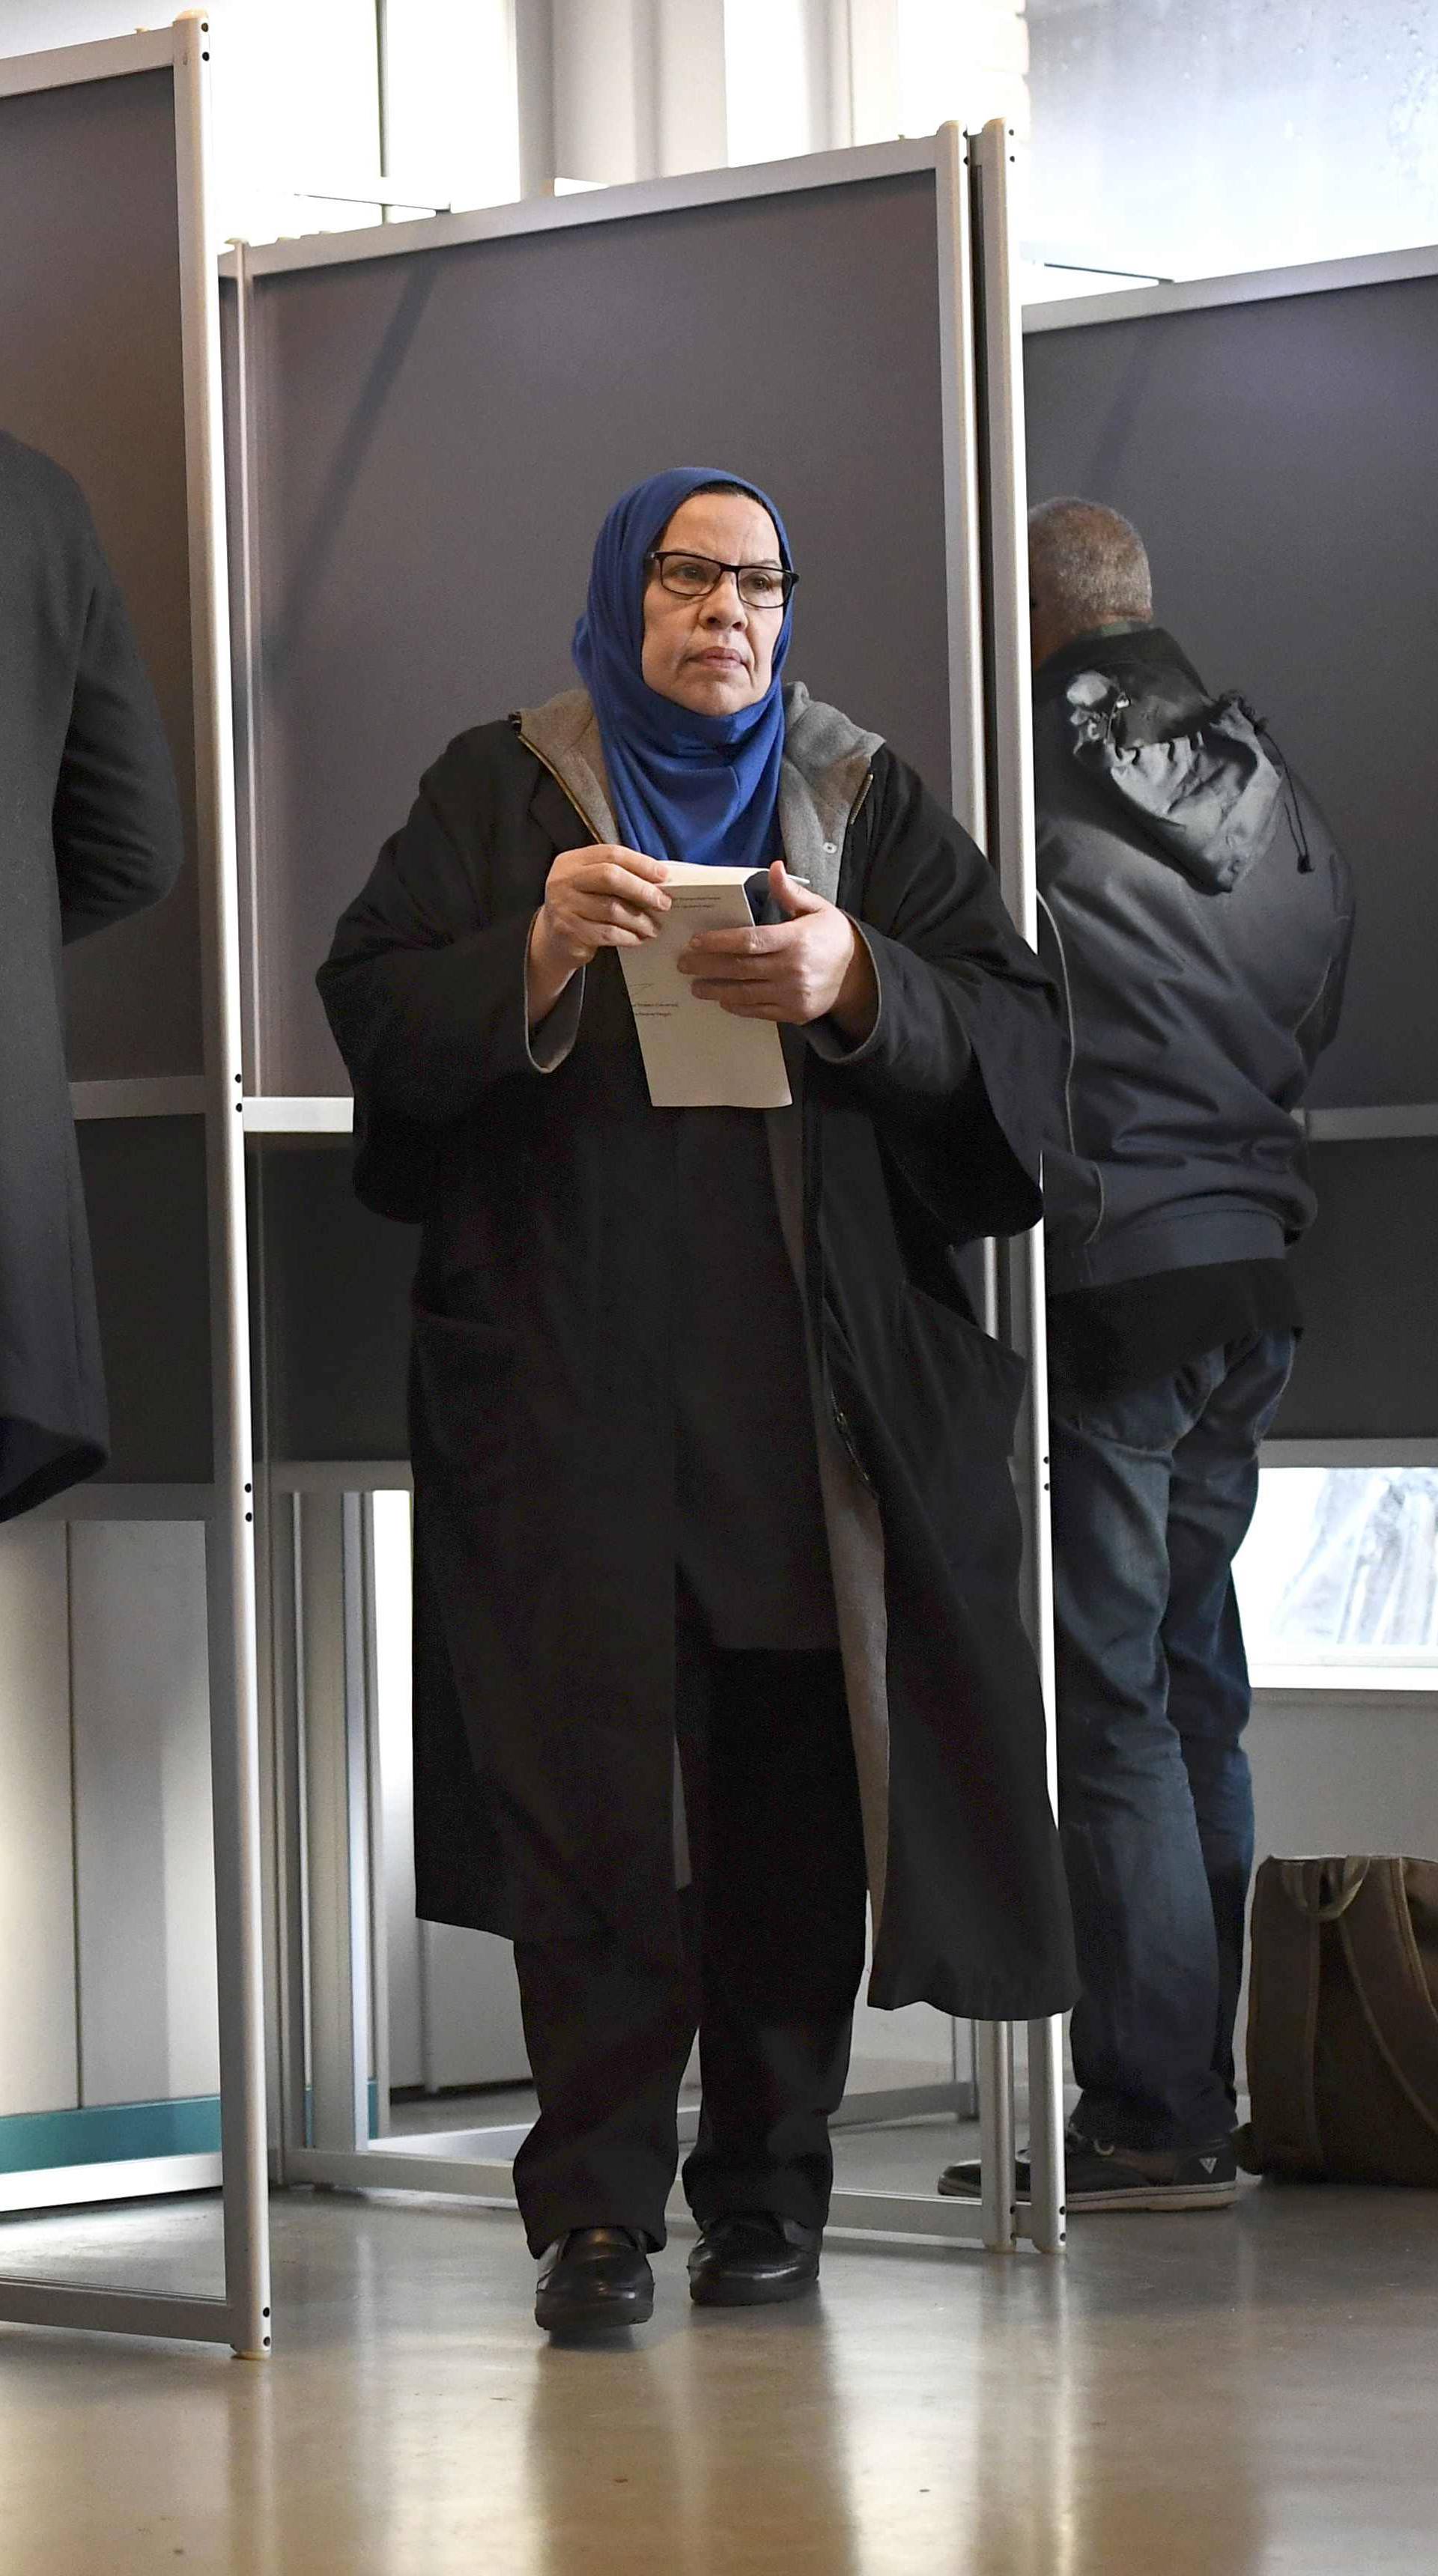 A woman votes in a polling station in the Netherlands